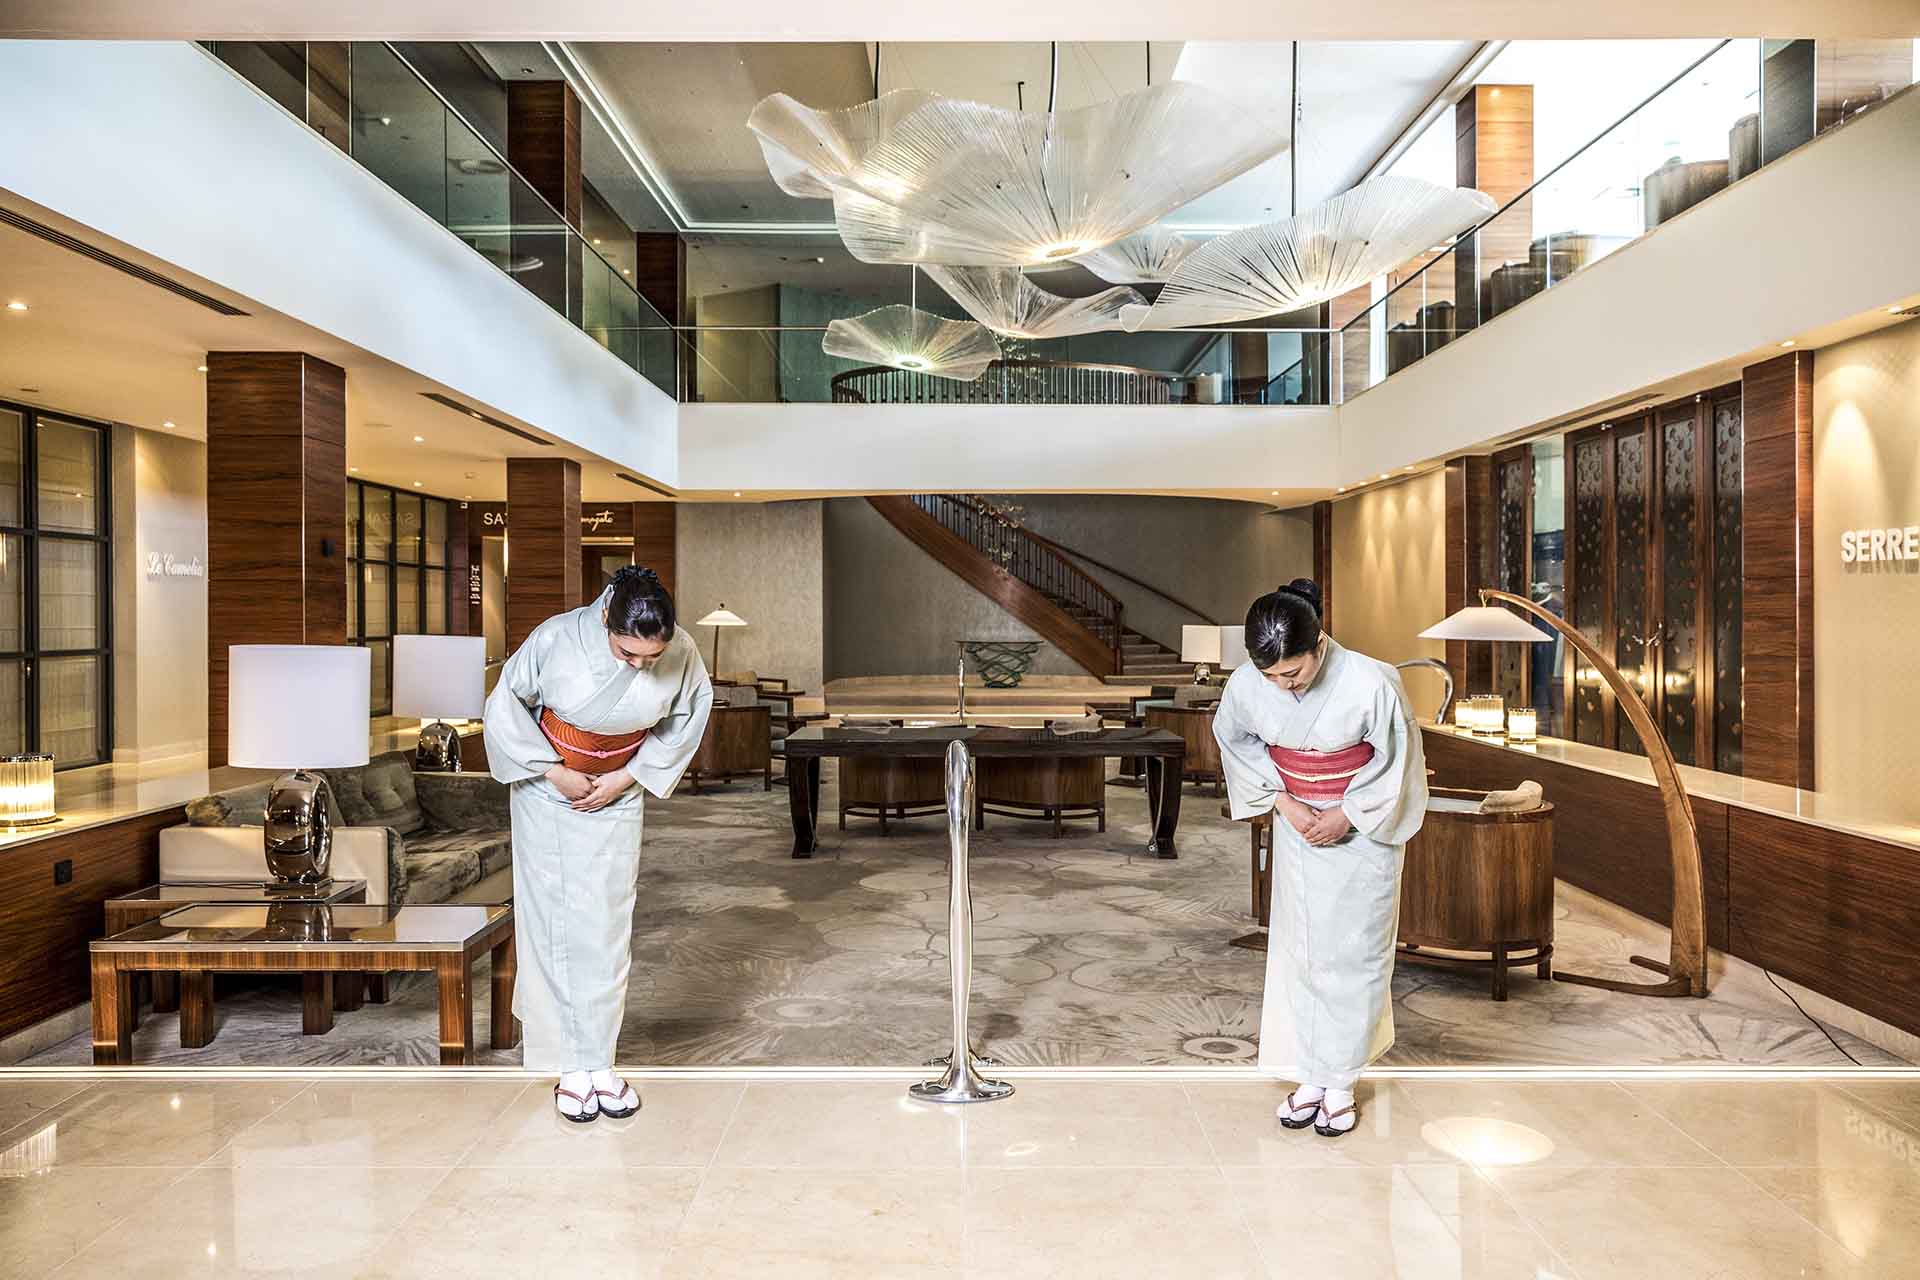 Kimono lady's bowing in lobby